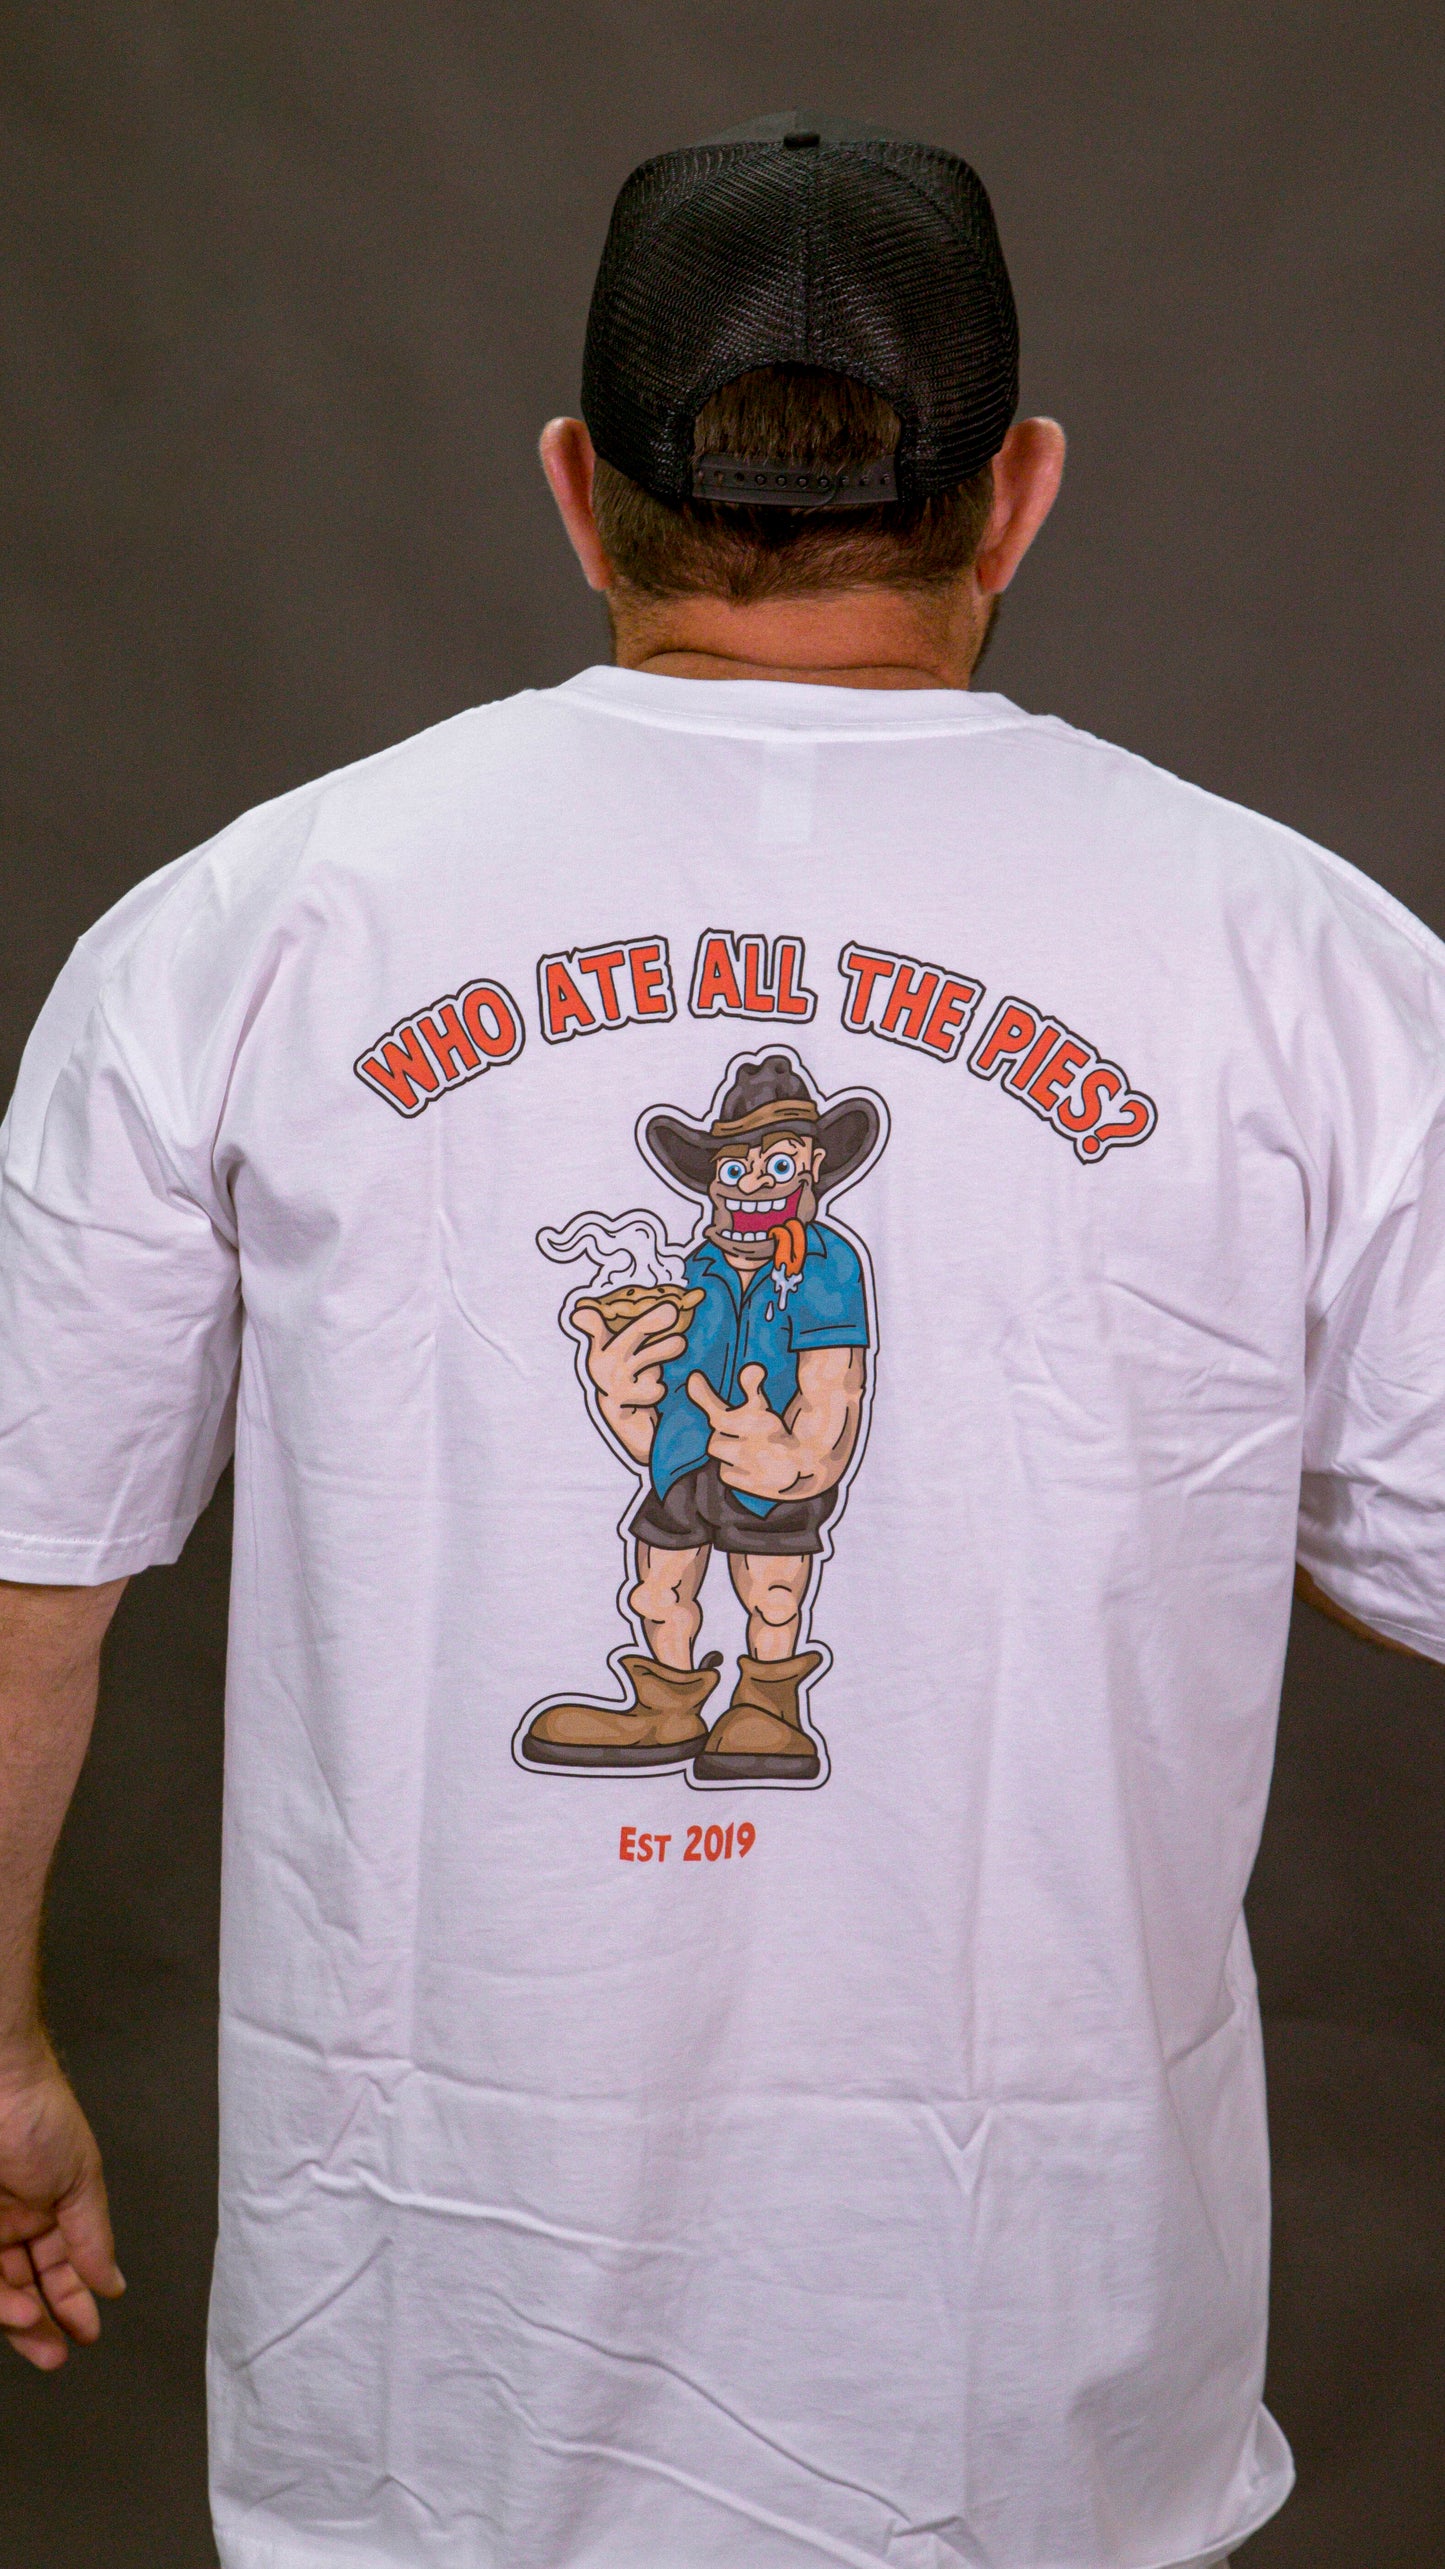 WHO ATE ALL THE PIES ? T-SHIRT